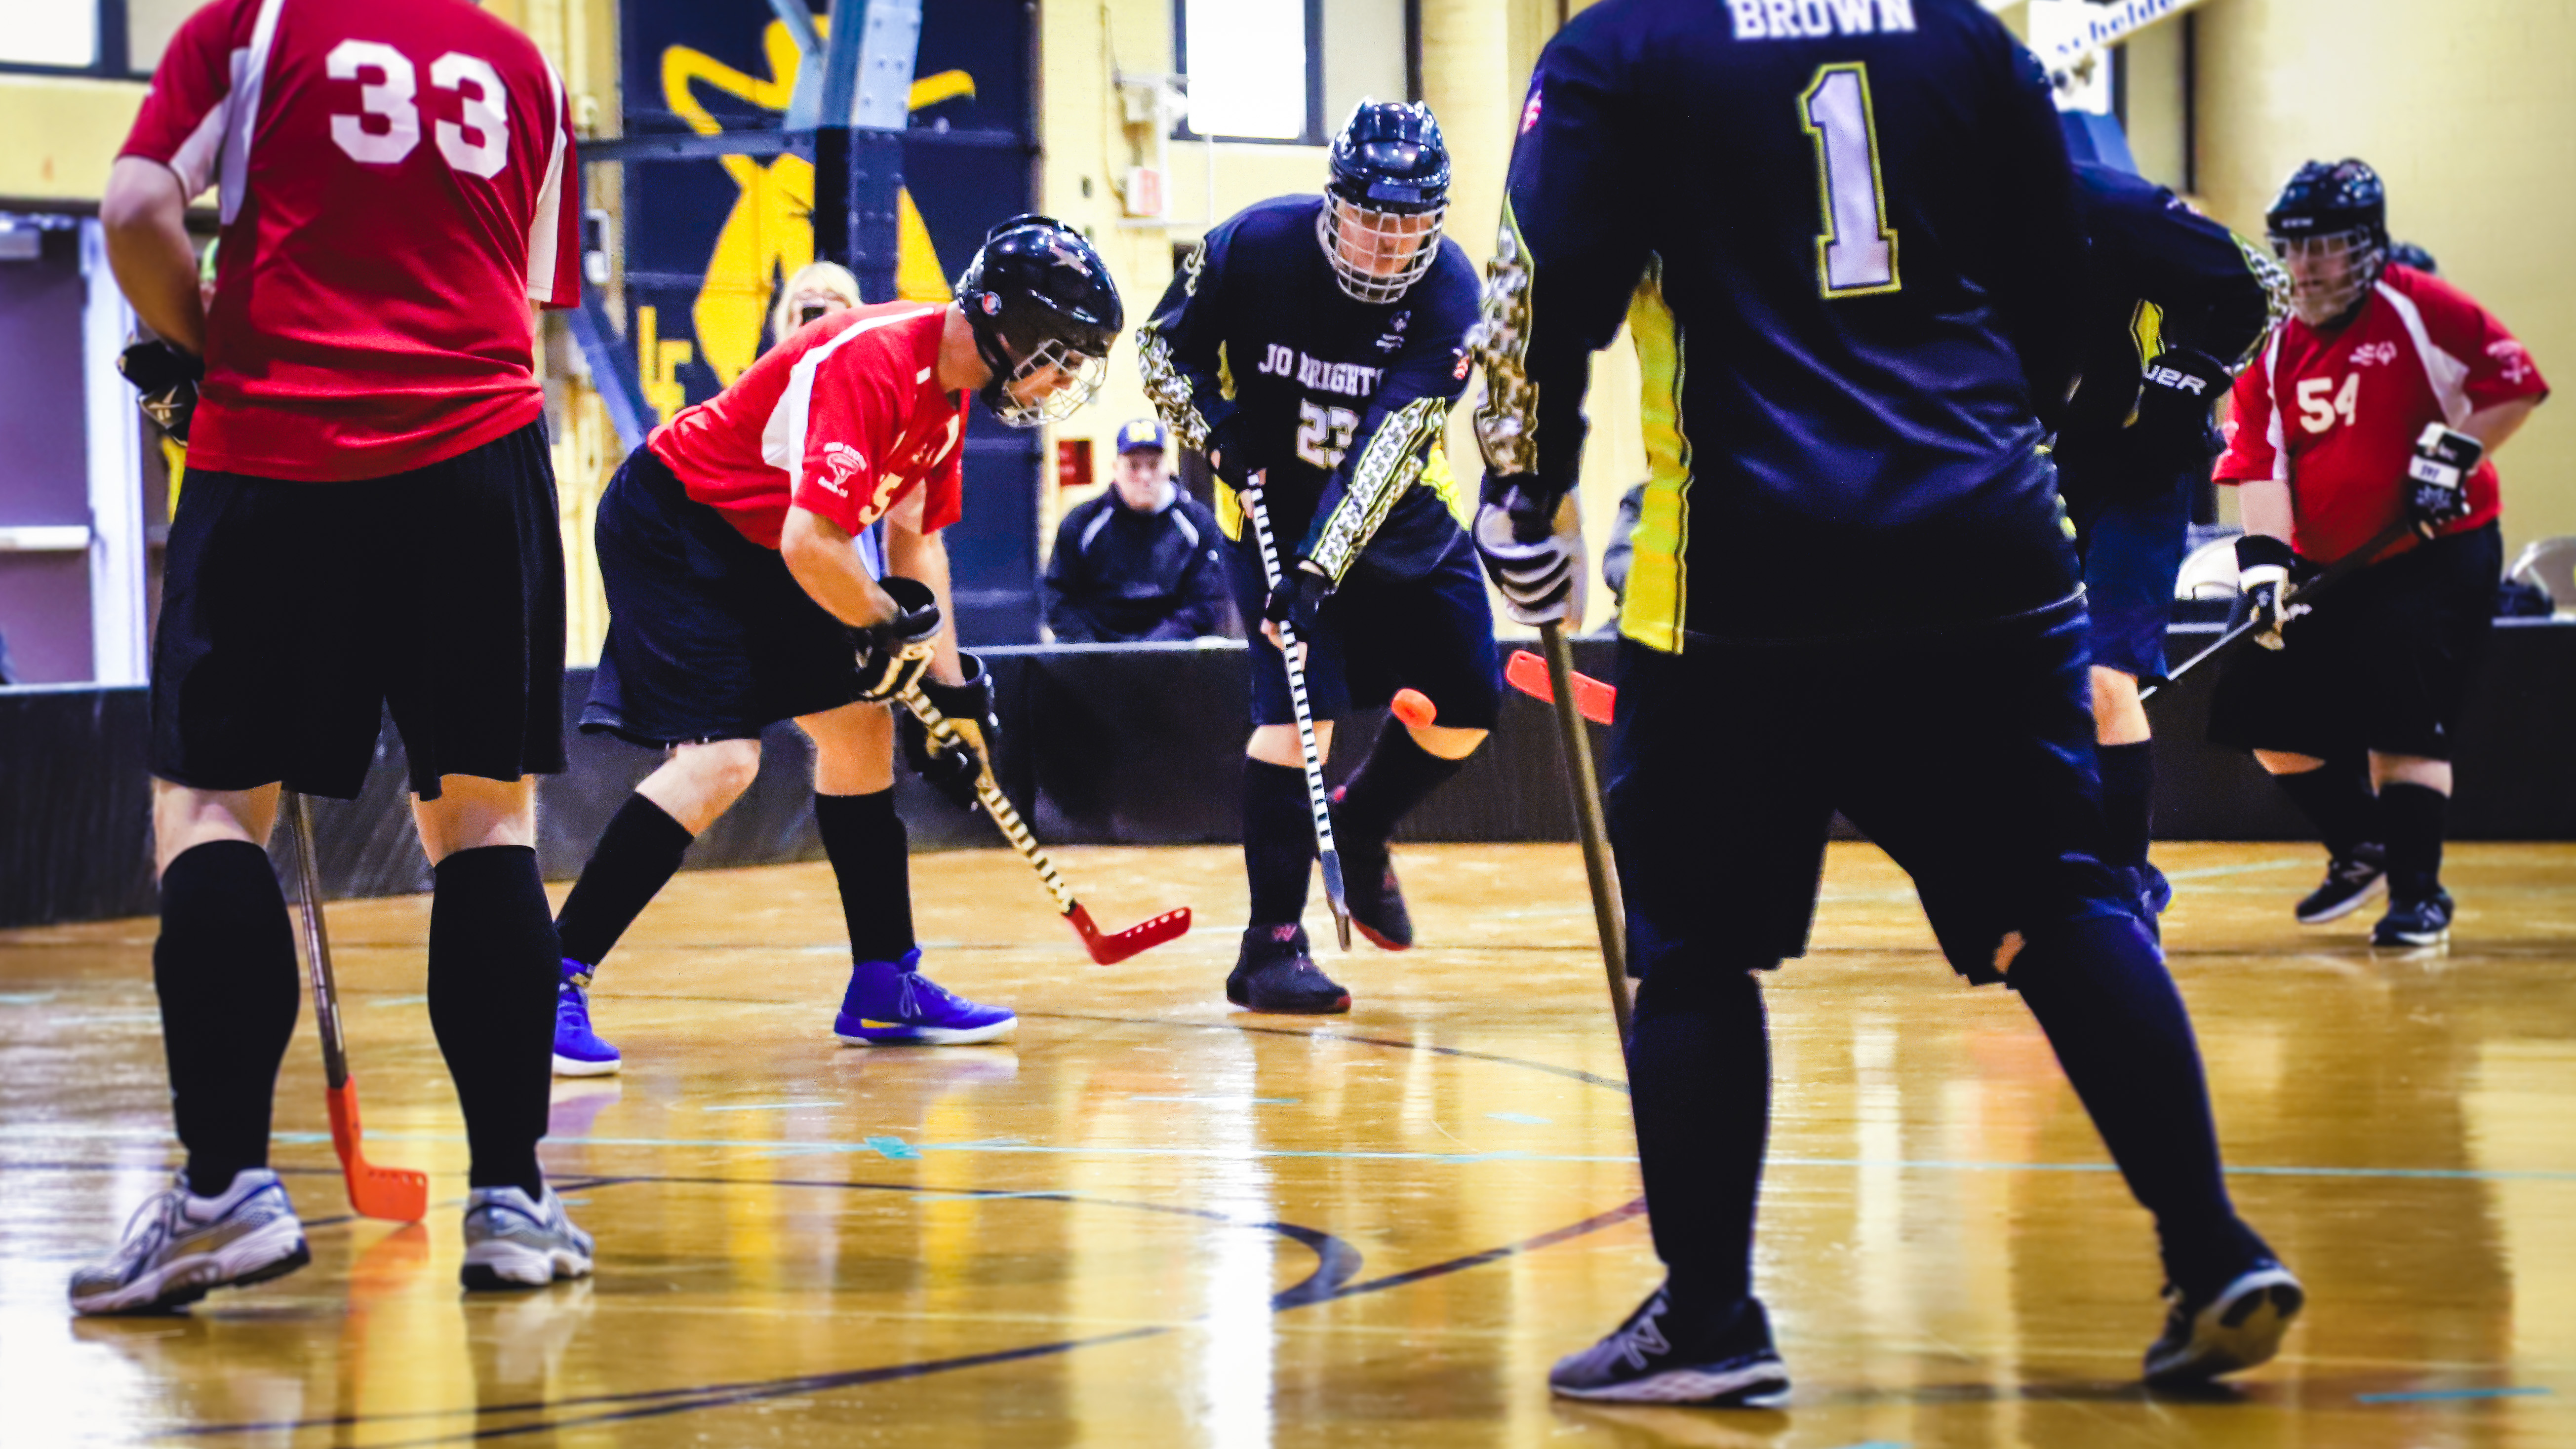 athletes on the court playing poly hockey